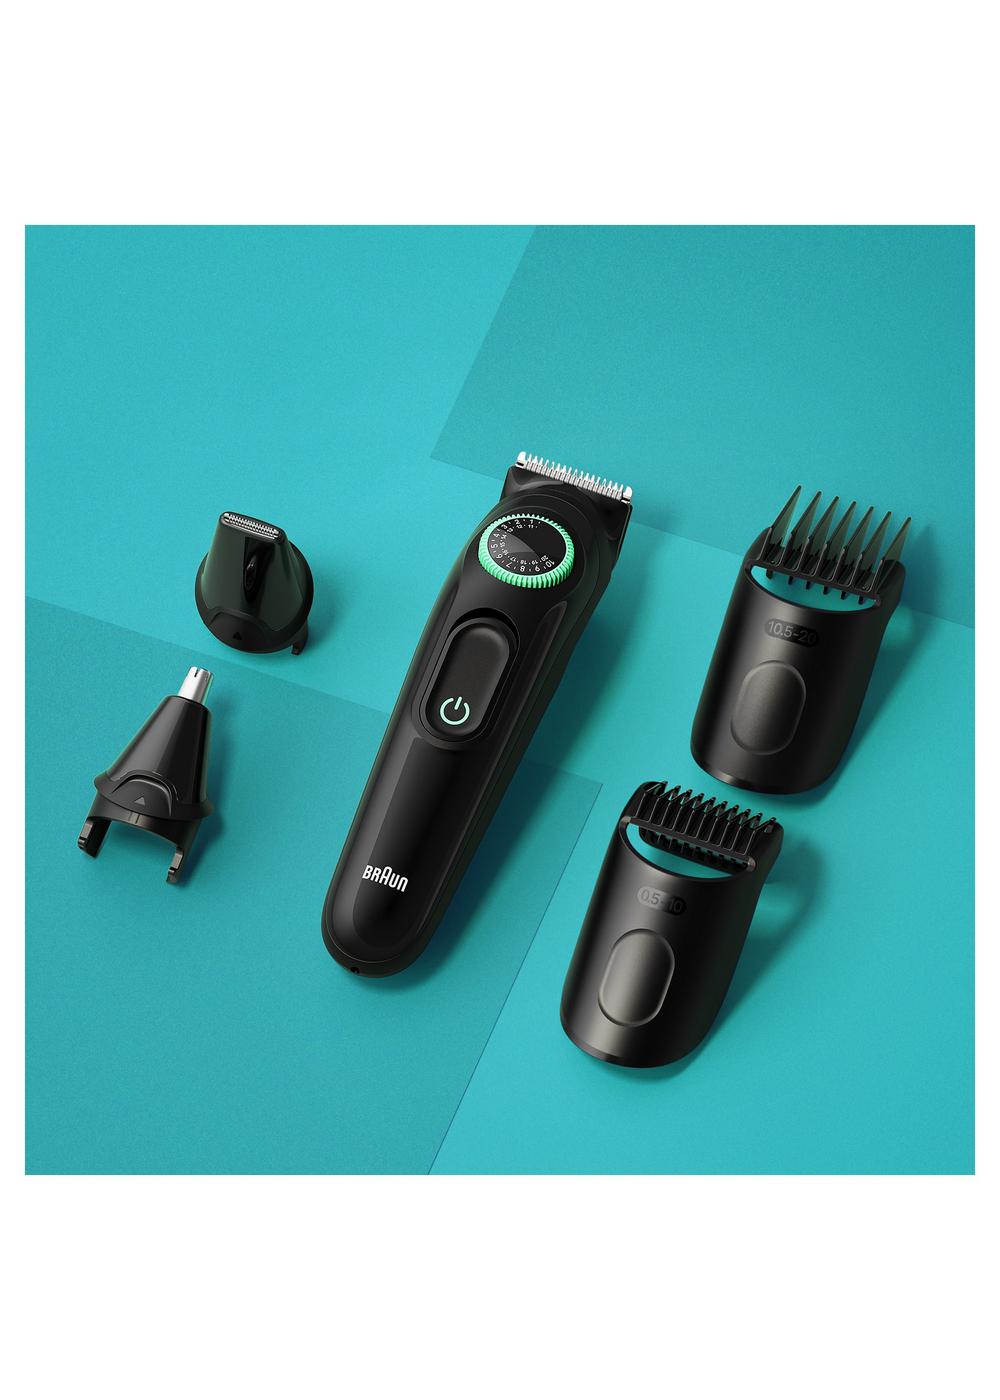 Braun Series 3 3430 All-In-One Style Kit, 3-in-1 Grooming Kit with Beard  Trimmer & More